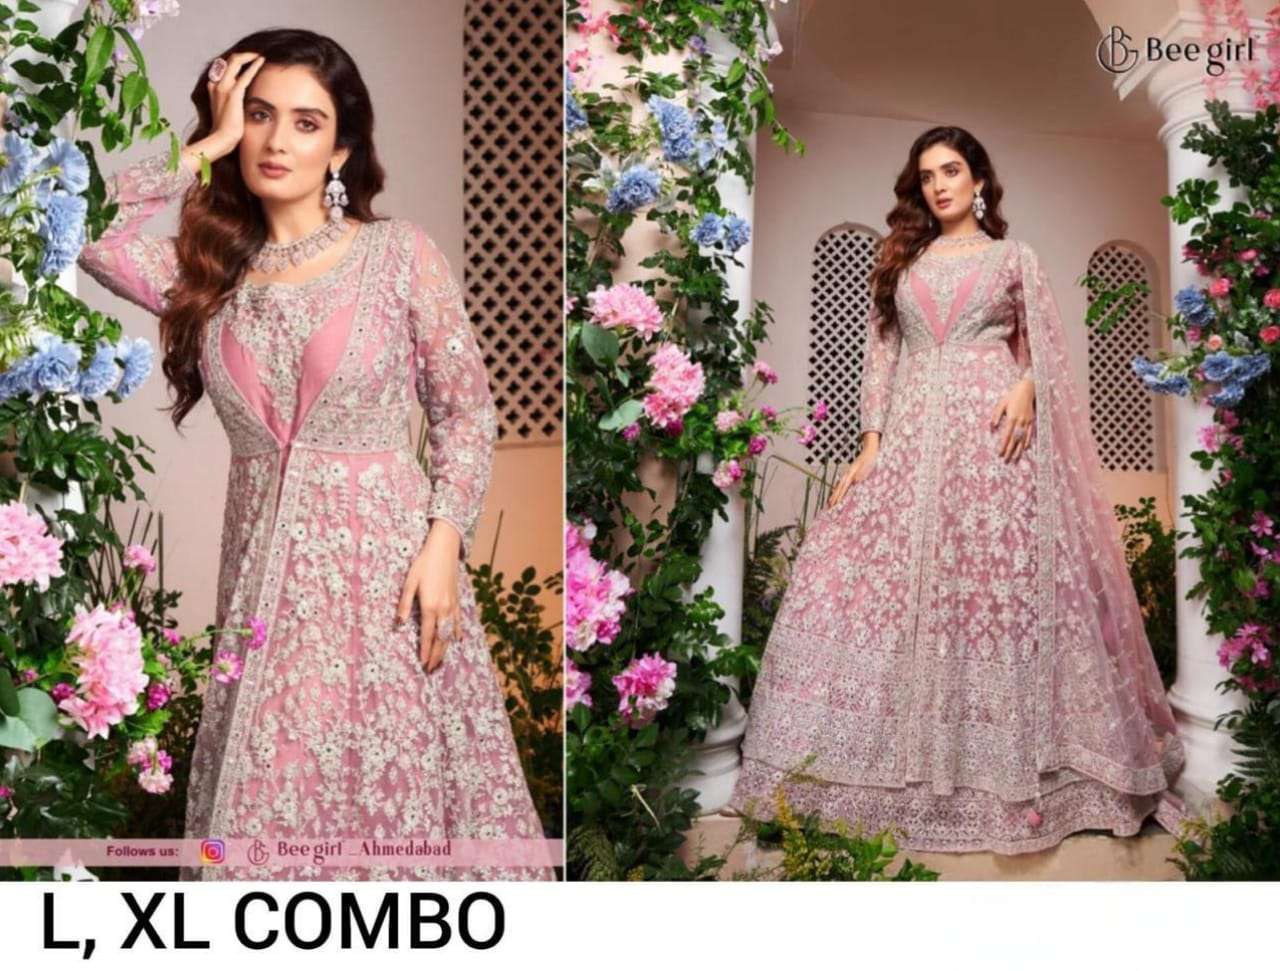 bee girl radiating timeless charm and sophistication this bridal ensemble features a jacket-style lehengameticulously crafted to perfection the soft light pink hue exudes femininity and grace